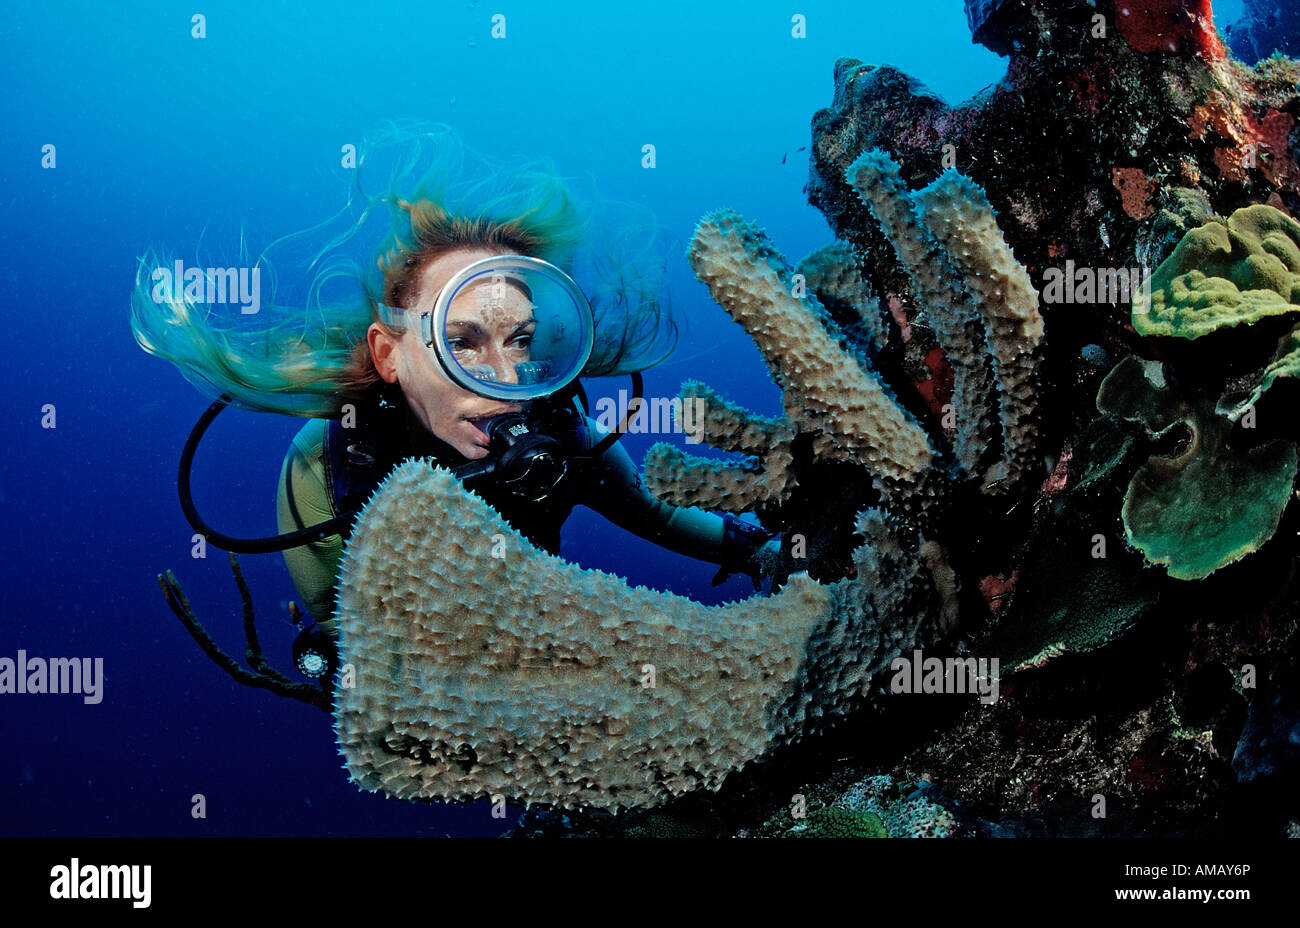 Scuba diver and coral reef Saint Lucia French West Indies Caribbean Sea Stock Photo